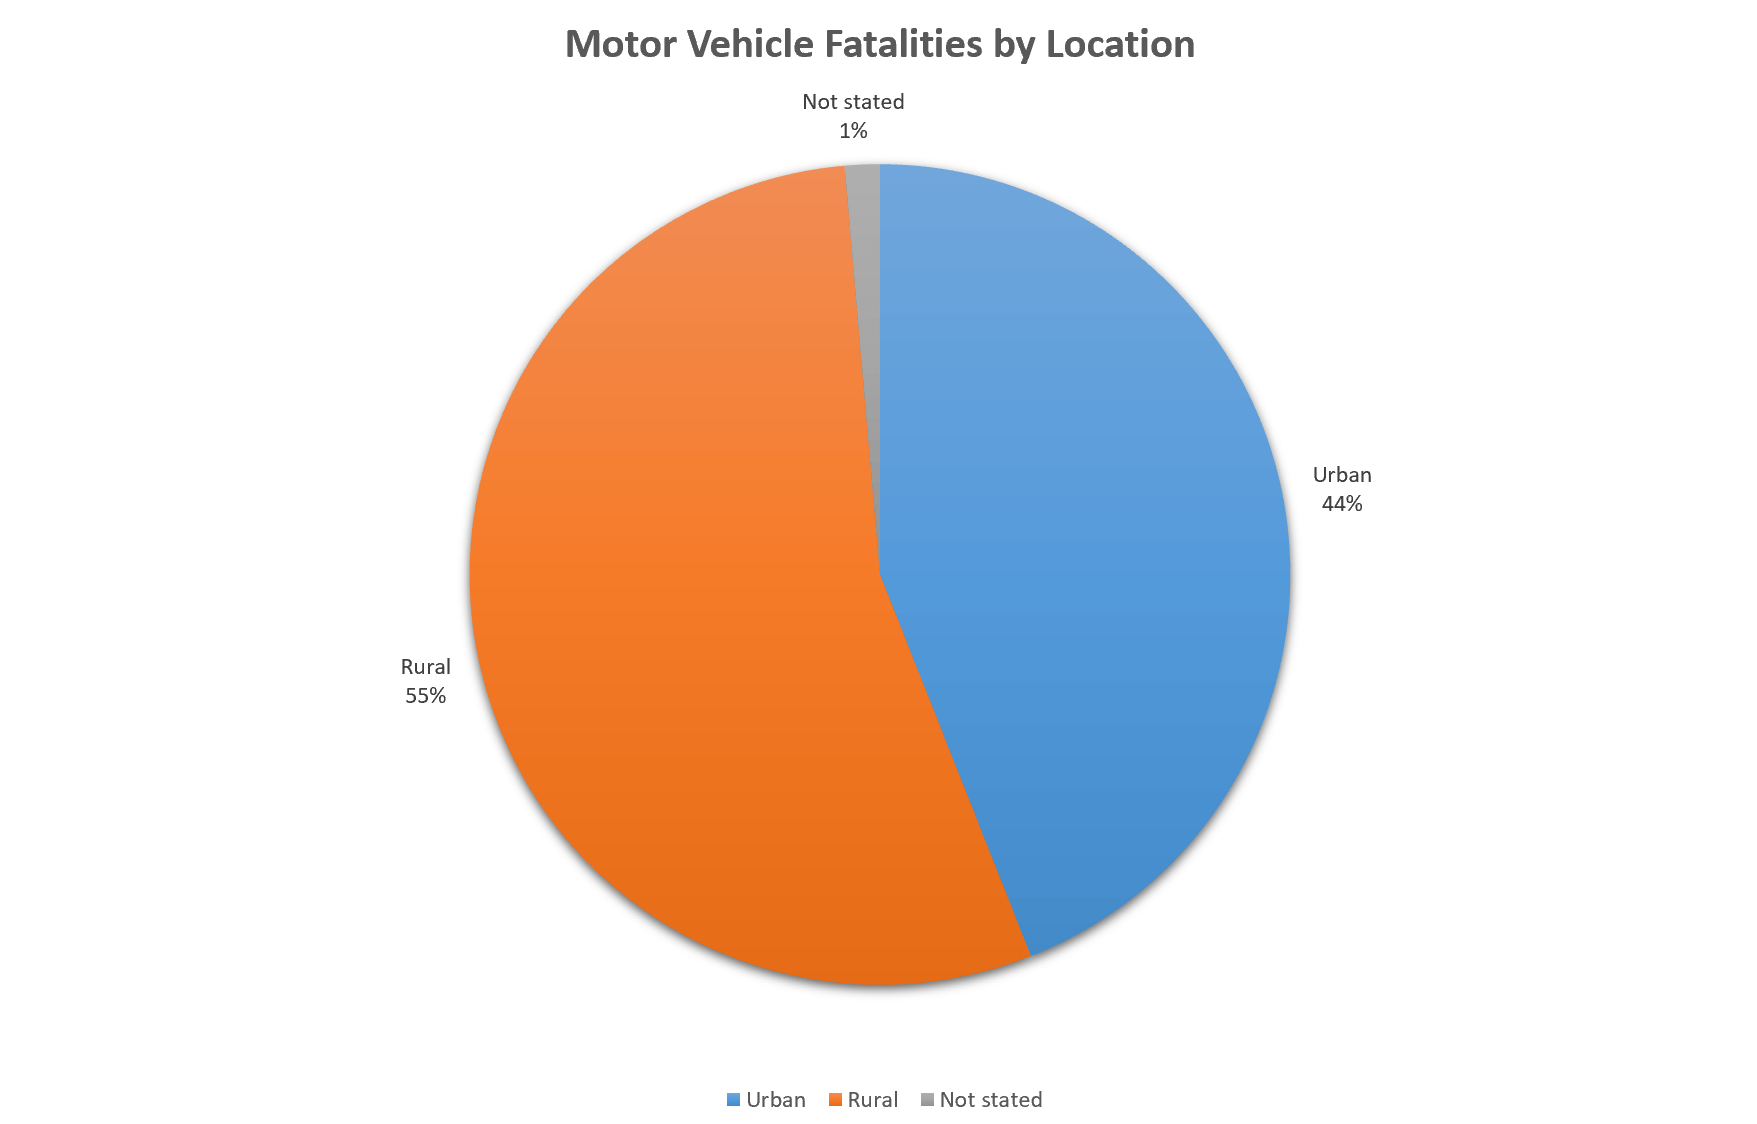 Motor Vehicle Fatalities by Location
